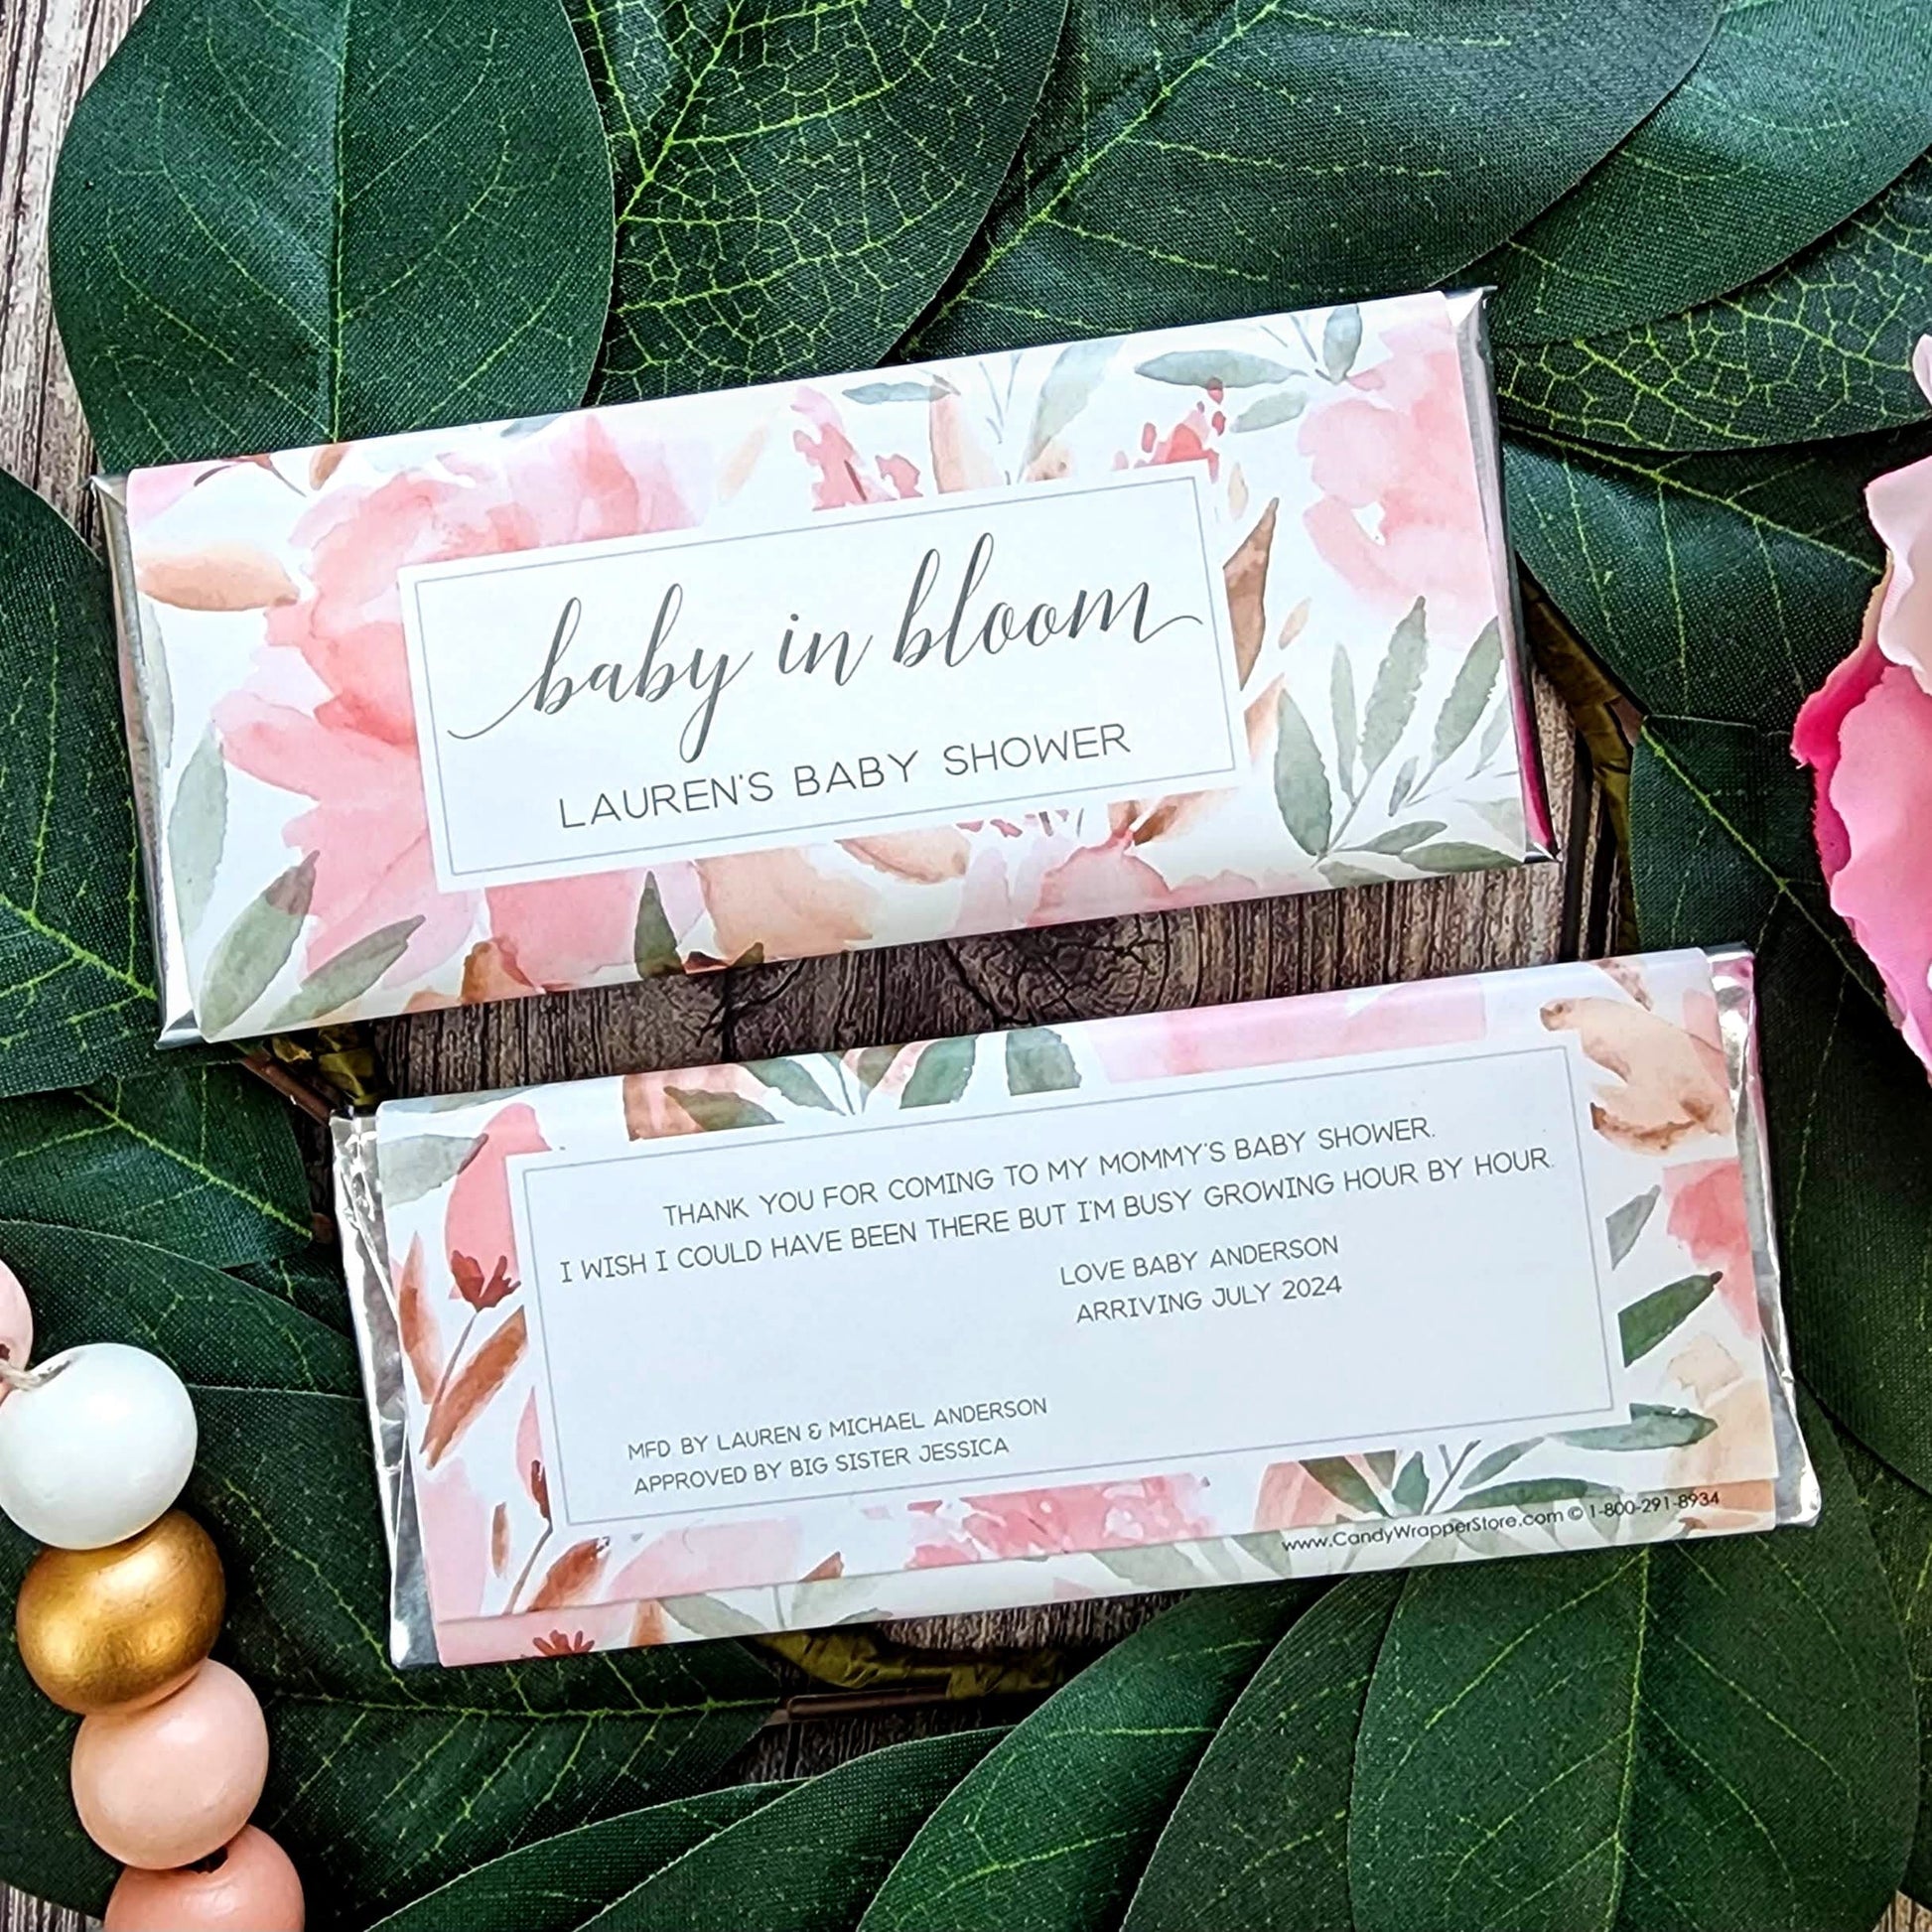 Baby in Bloom Watercolor Floral Baby Shower Candy Bar Wrappers - BS279 Baby in Bloom Watercolor Floral Baby Shower Candy Bar Wrappers Baby & Toddler BS279